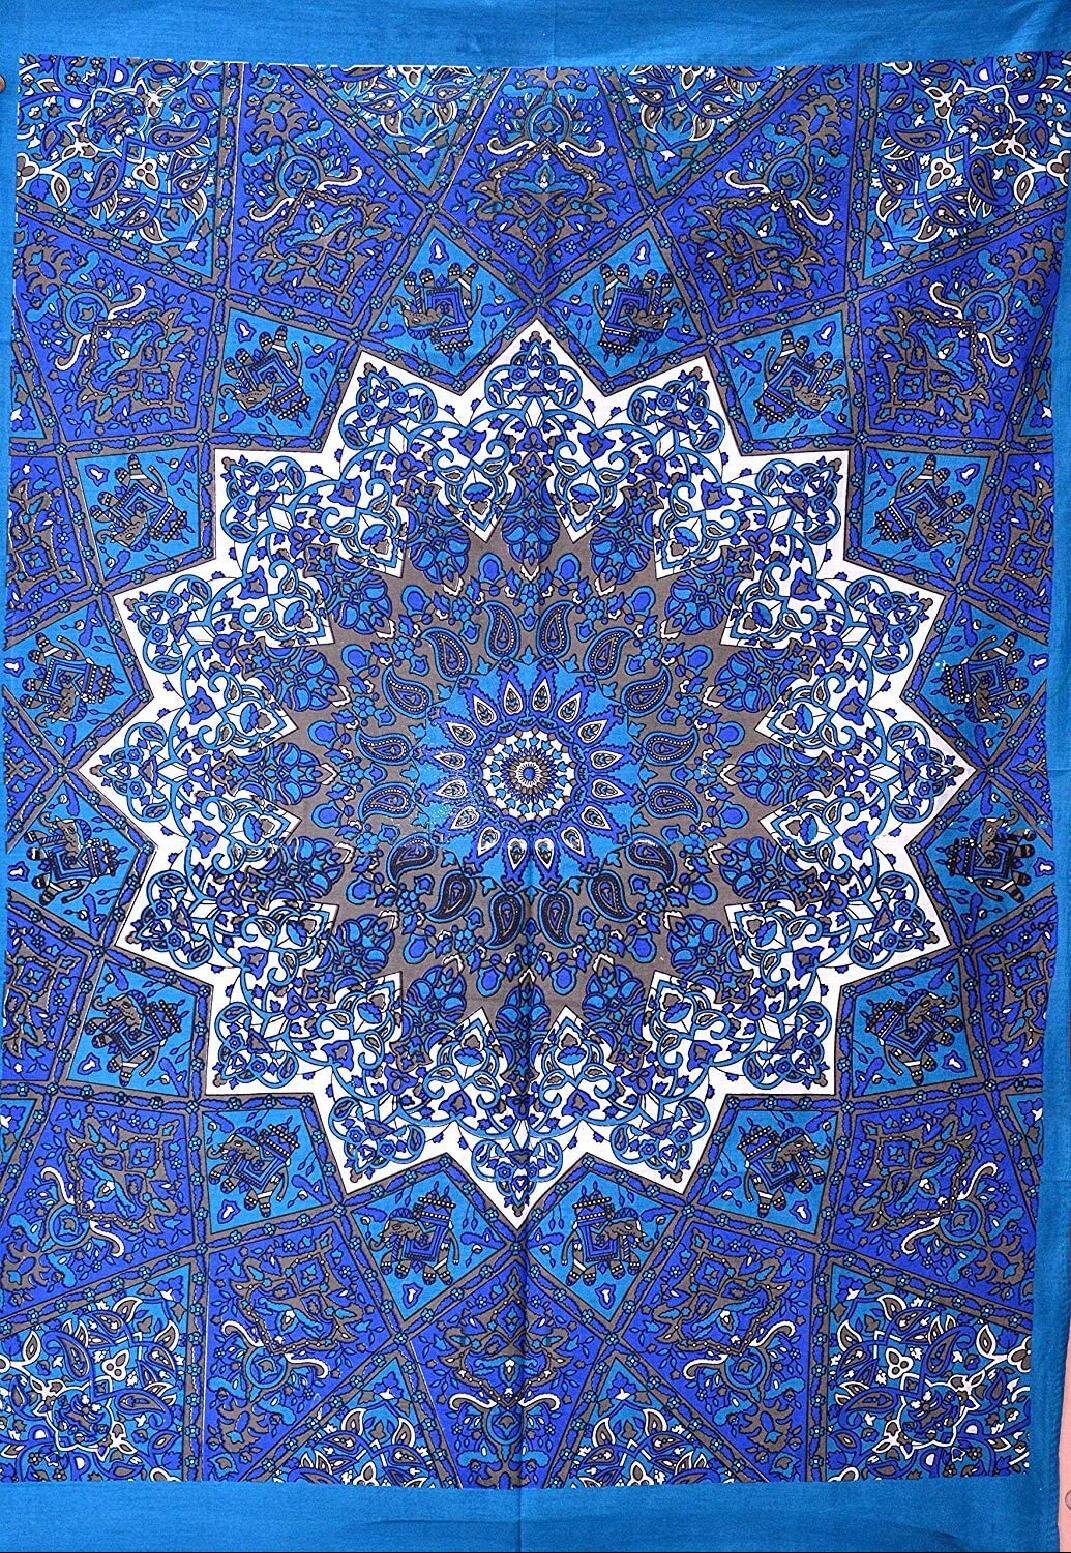 Indian Blue Gold Ombre Mandala Wall Tapestry Boho Decorative Curtains Window Set 